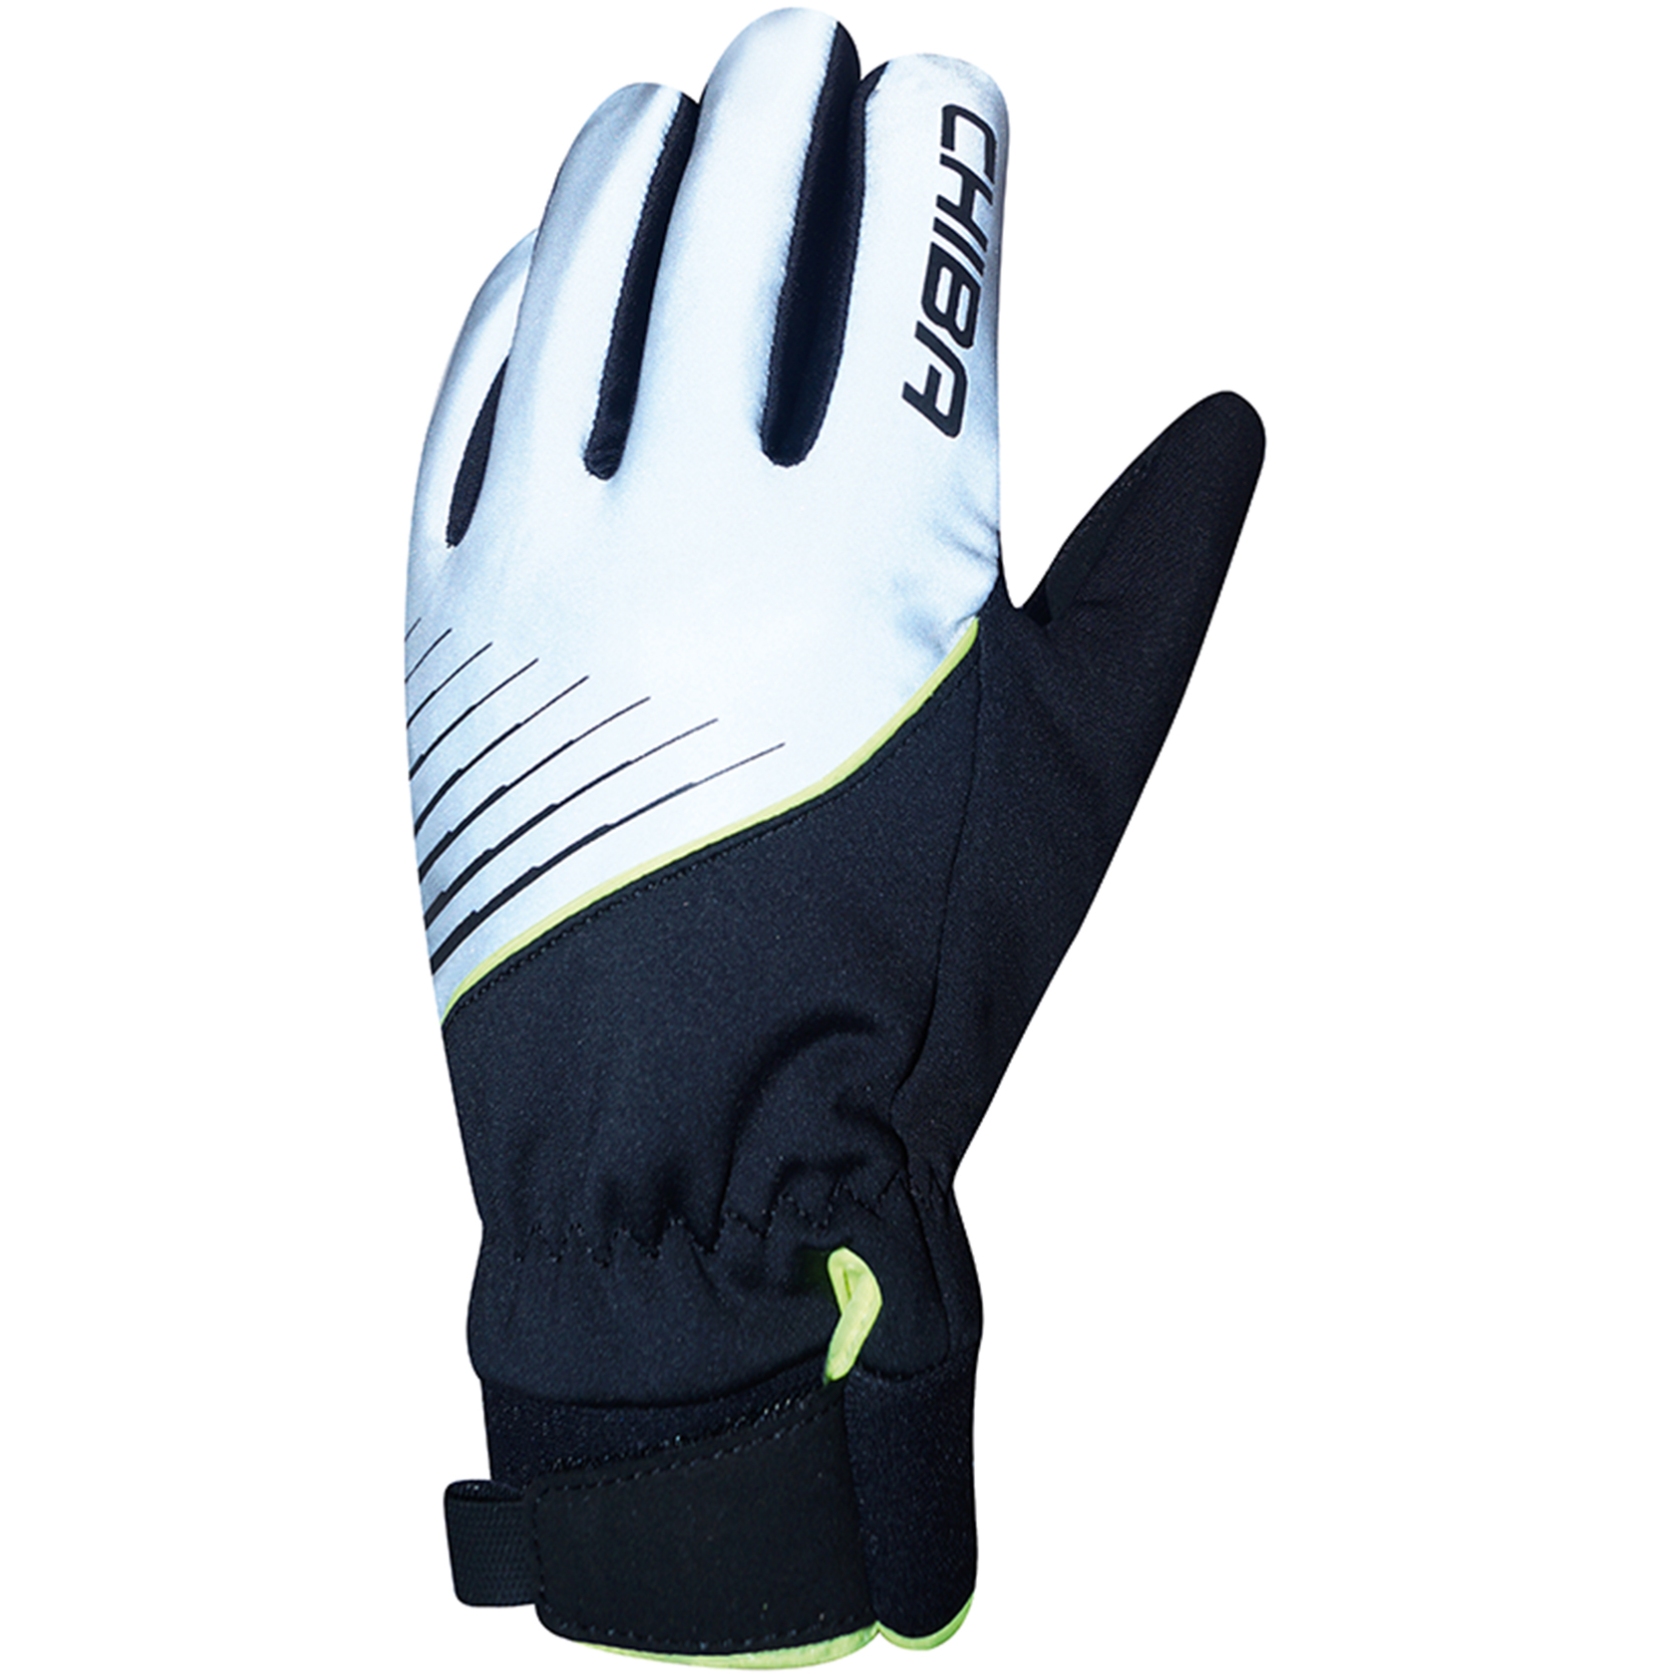 Picture of Chiba Kids Waterproof Cycling Gloves - silver reflective/black